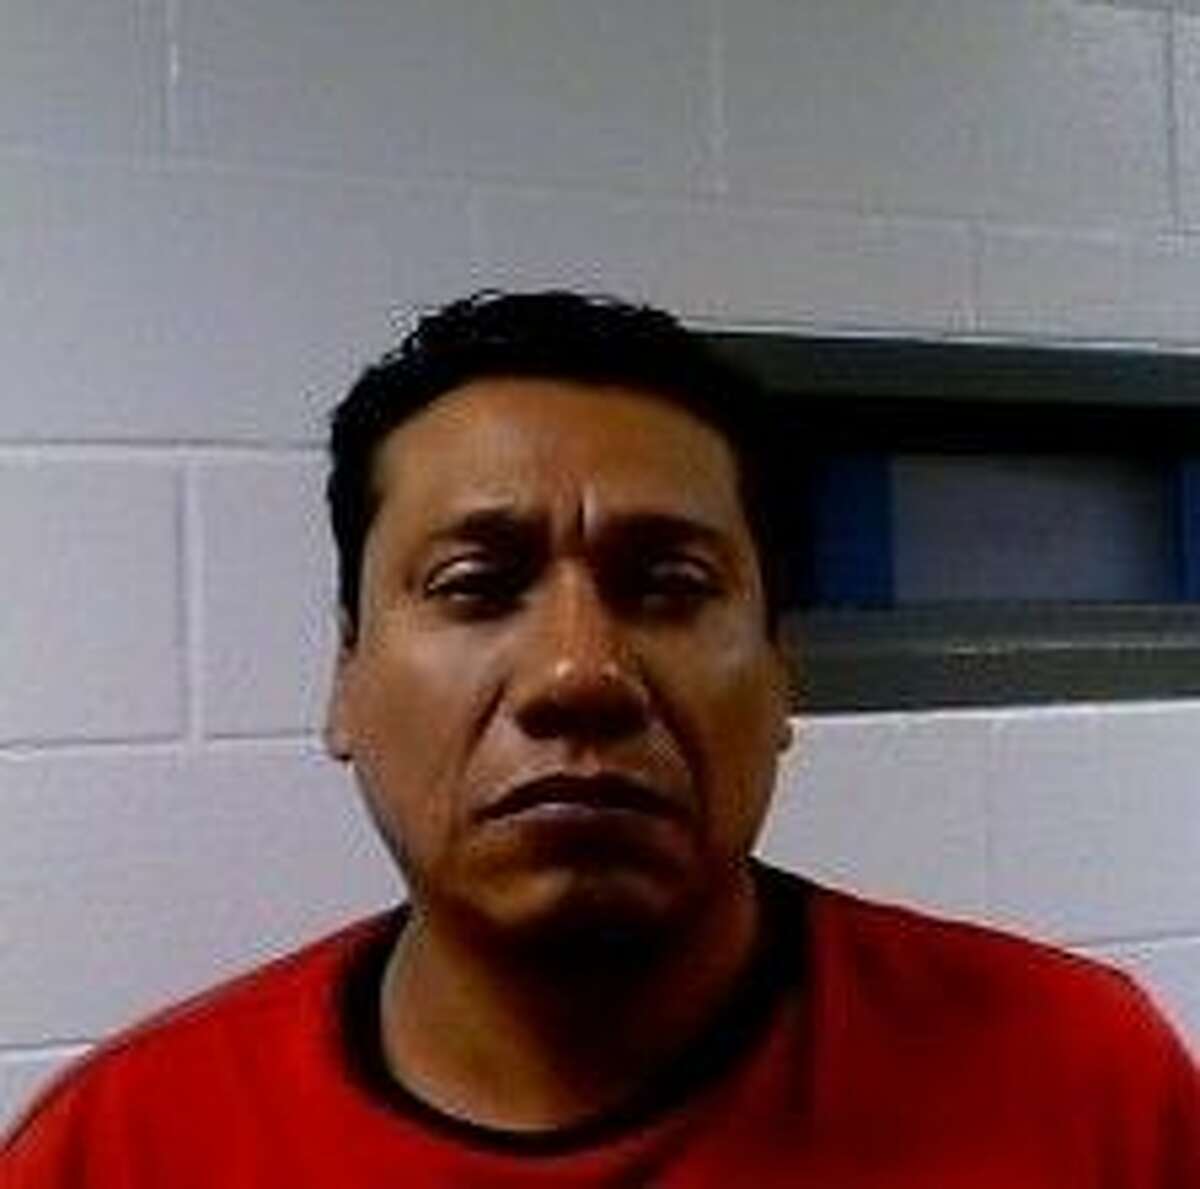 Another defendant - Alfonso Diaz-Juarez aka Ponco or El Grenas, a 45-year-old Mexican national - is a fugitive and a warrant remains outstanding for his arrest. Anyone with information about his whereabouts is asked to contact the FBI at 713-693-5000.